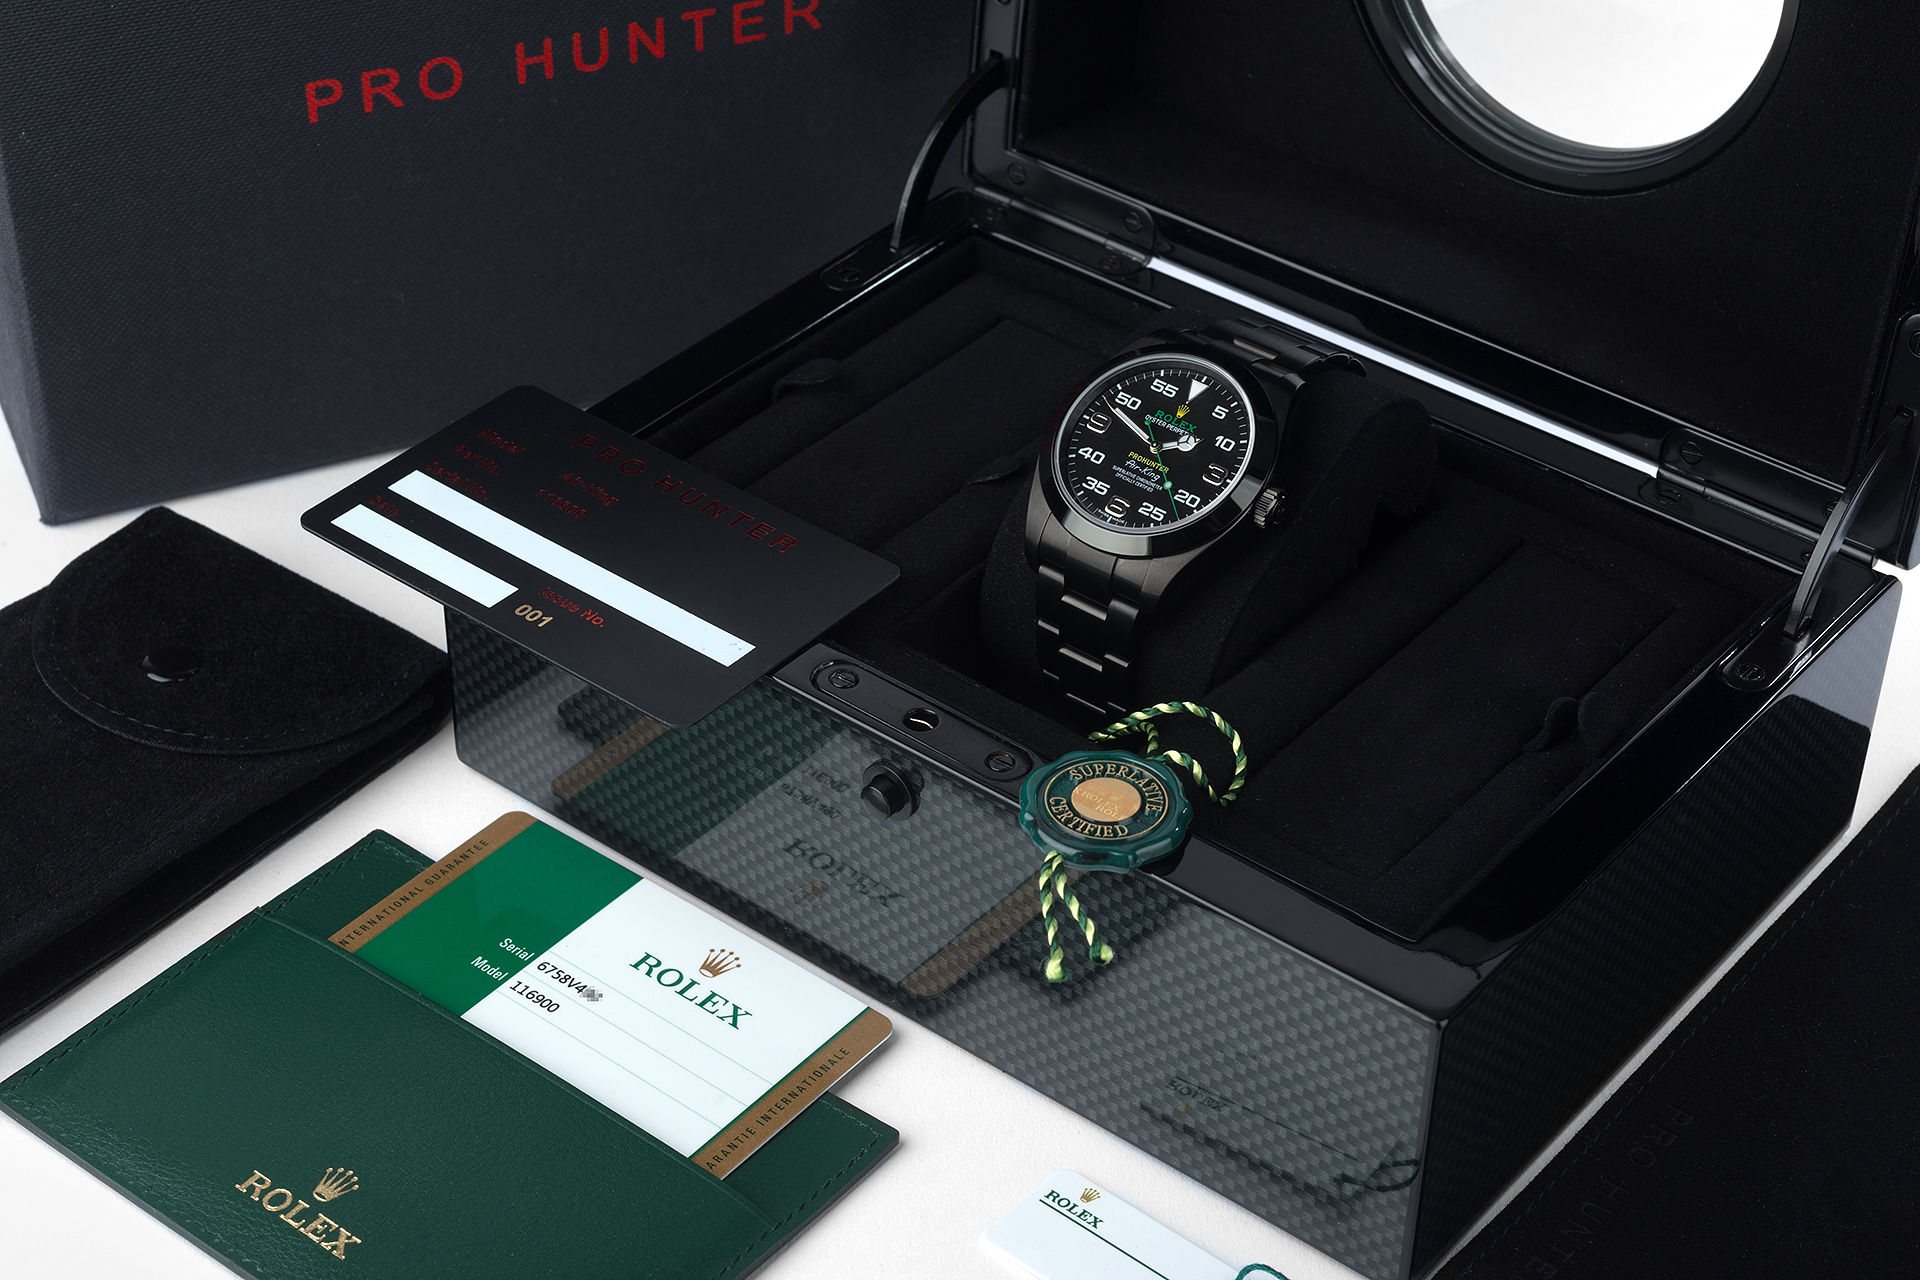 ref 116900 | 001 of 100 Limited Edition | Pro Hunter Air-King